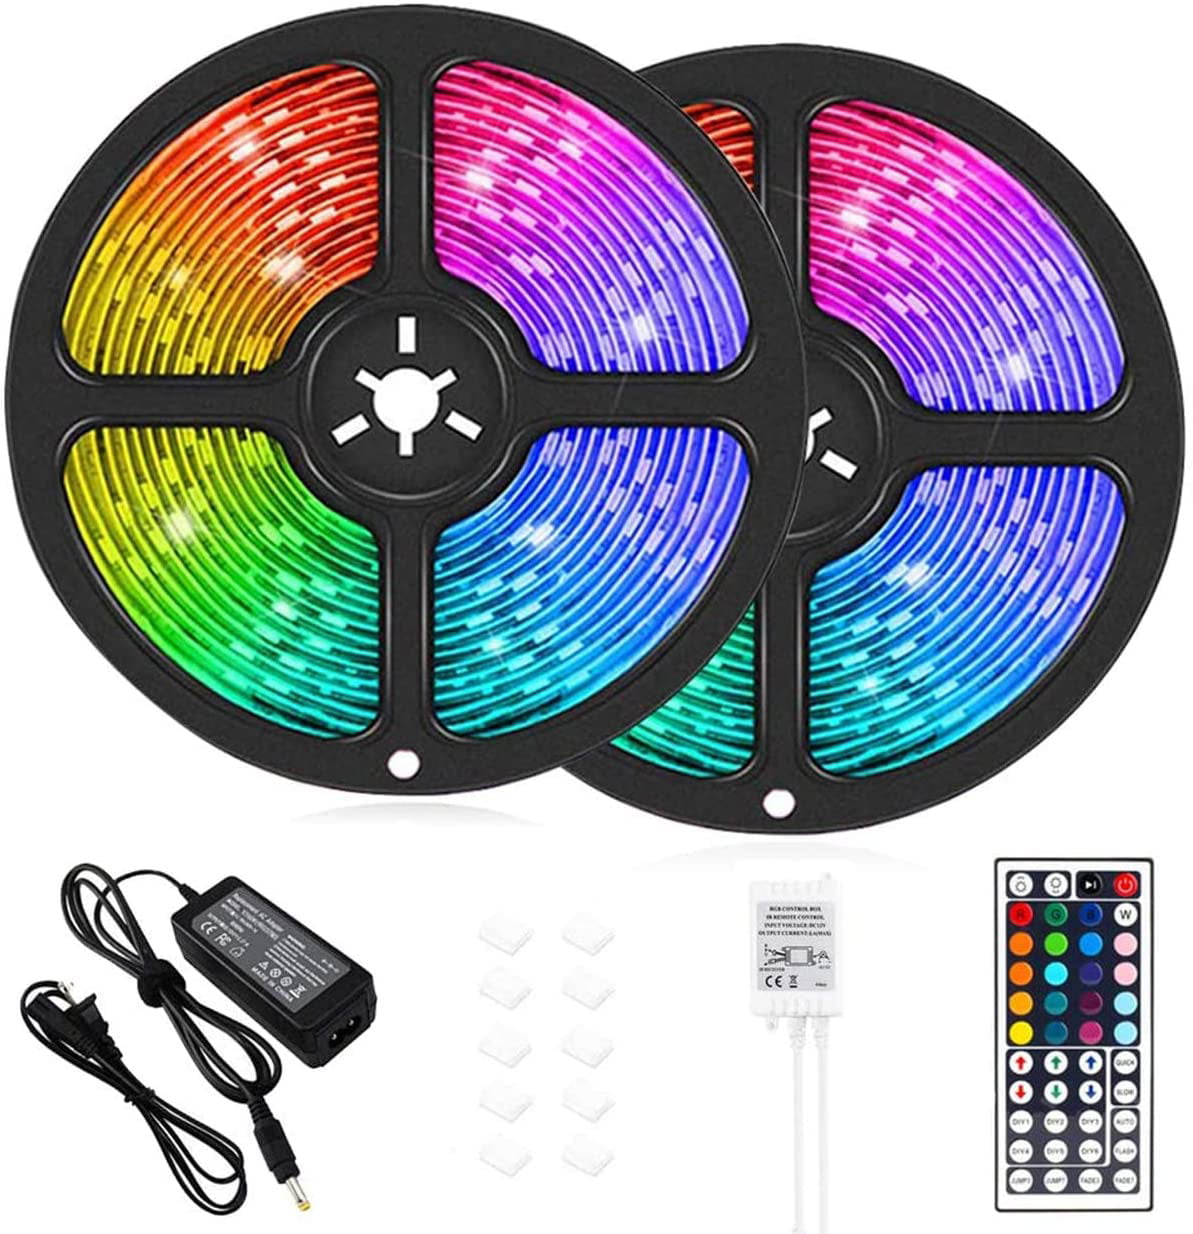 Details about   20M 66FT Flexible Strip Light 3528 RGB LED SMD Remote Fairy Lights Room TV Party 